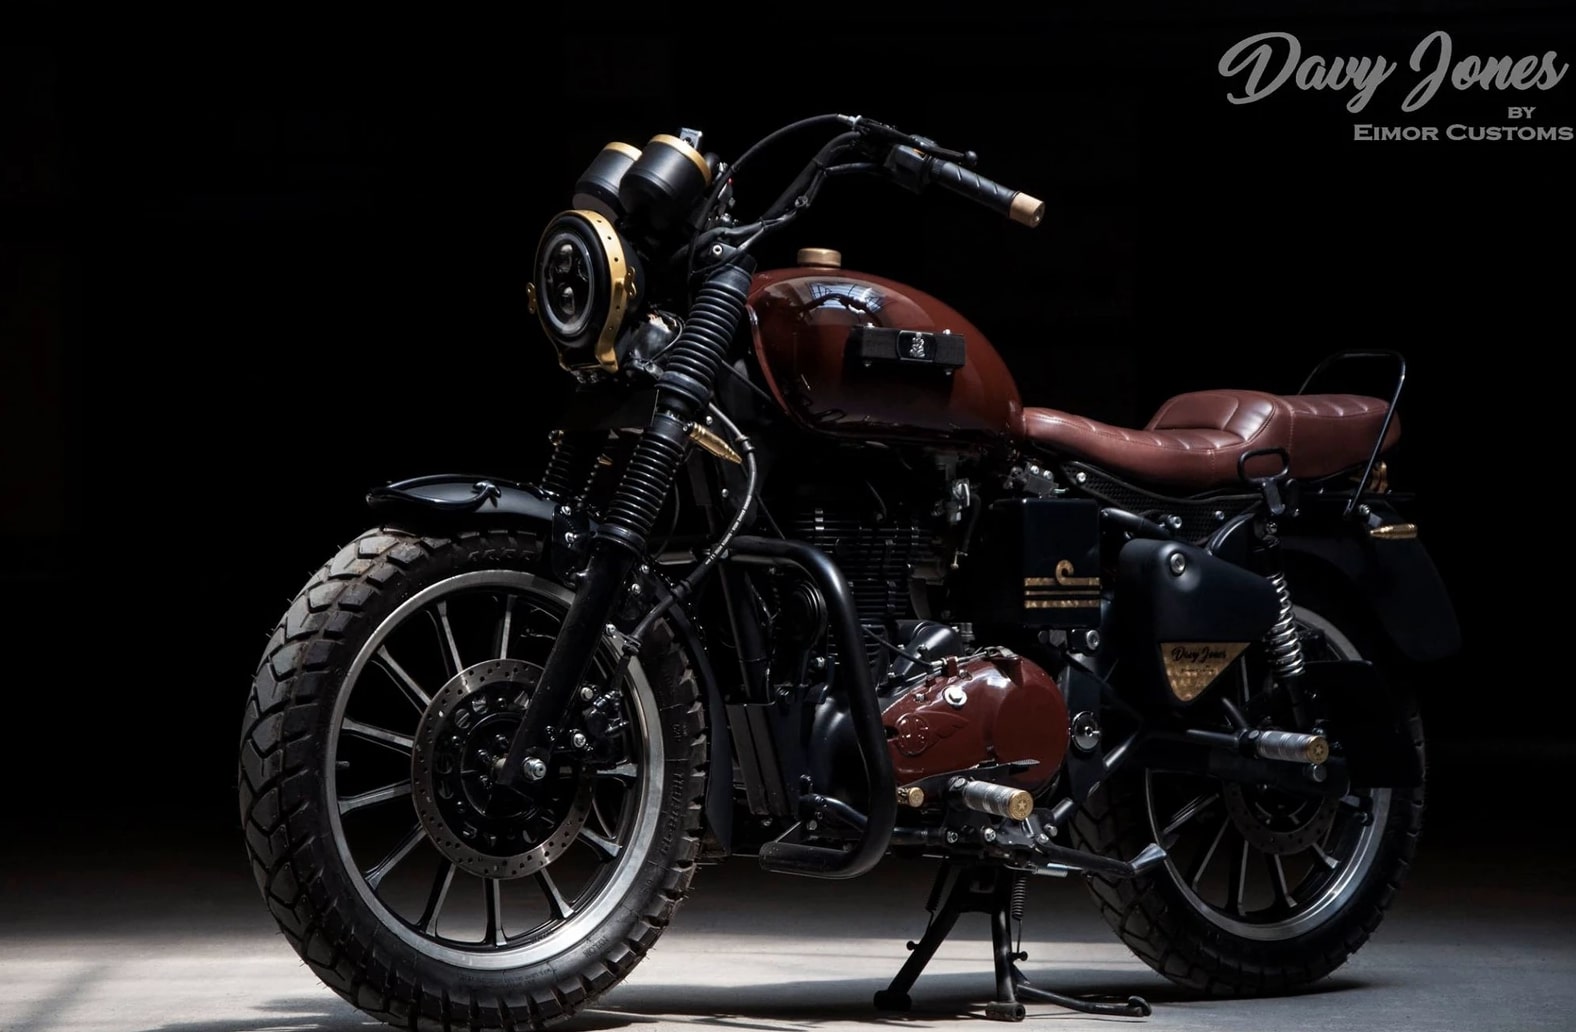 EIMOR Royal Enfield TB 350 Davy Jones Edition Details and Photos - shot